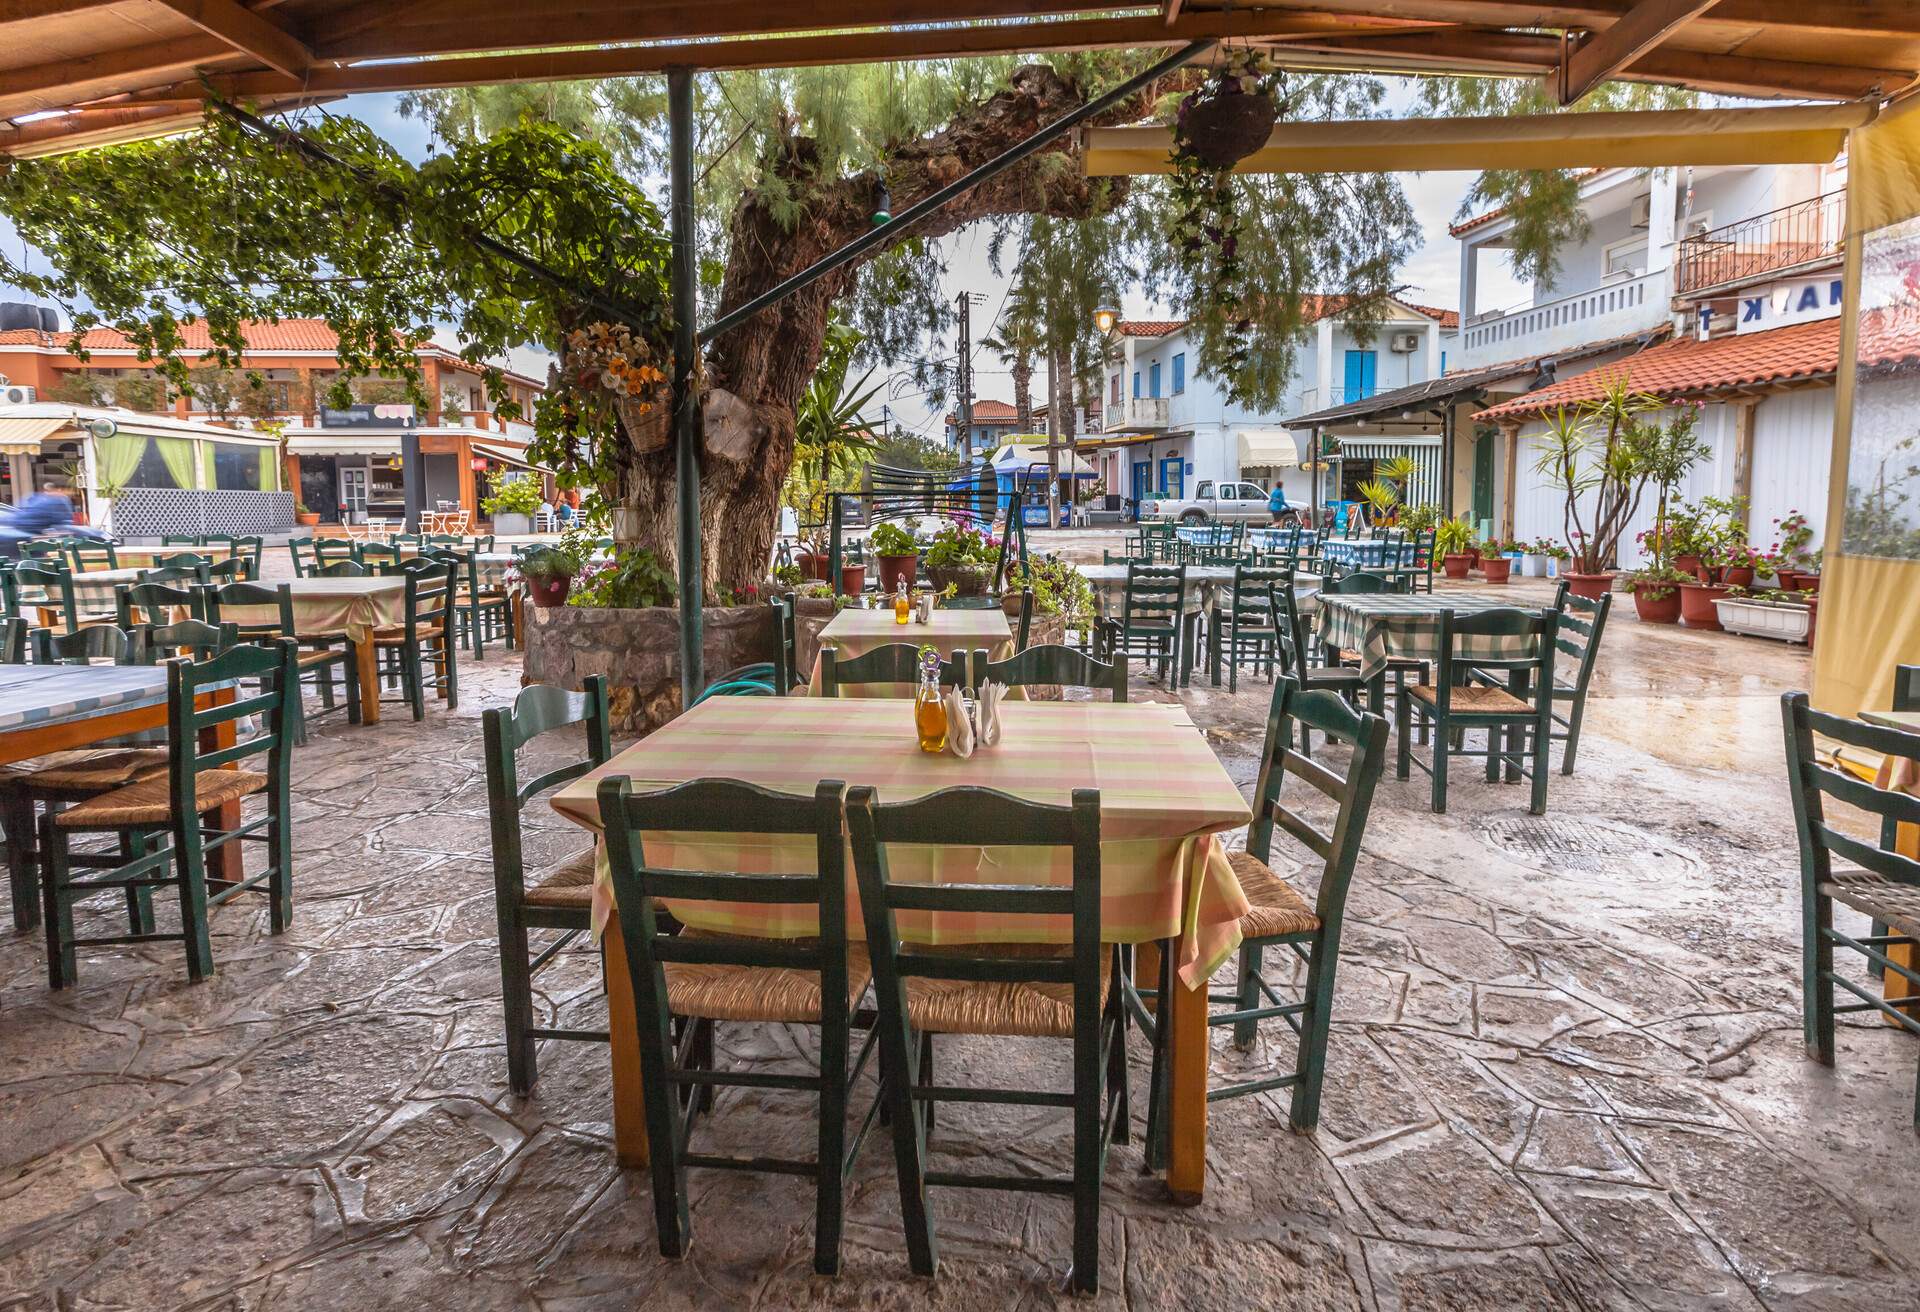 Traditional village restaurant terrace with wooden tables and chairs under a huge tree